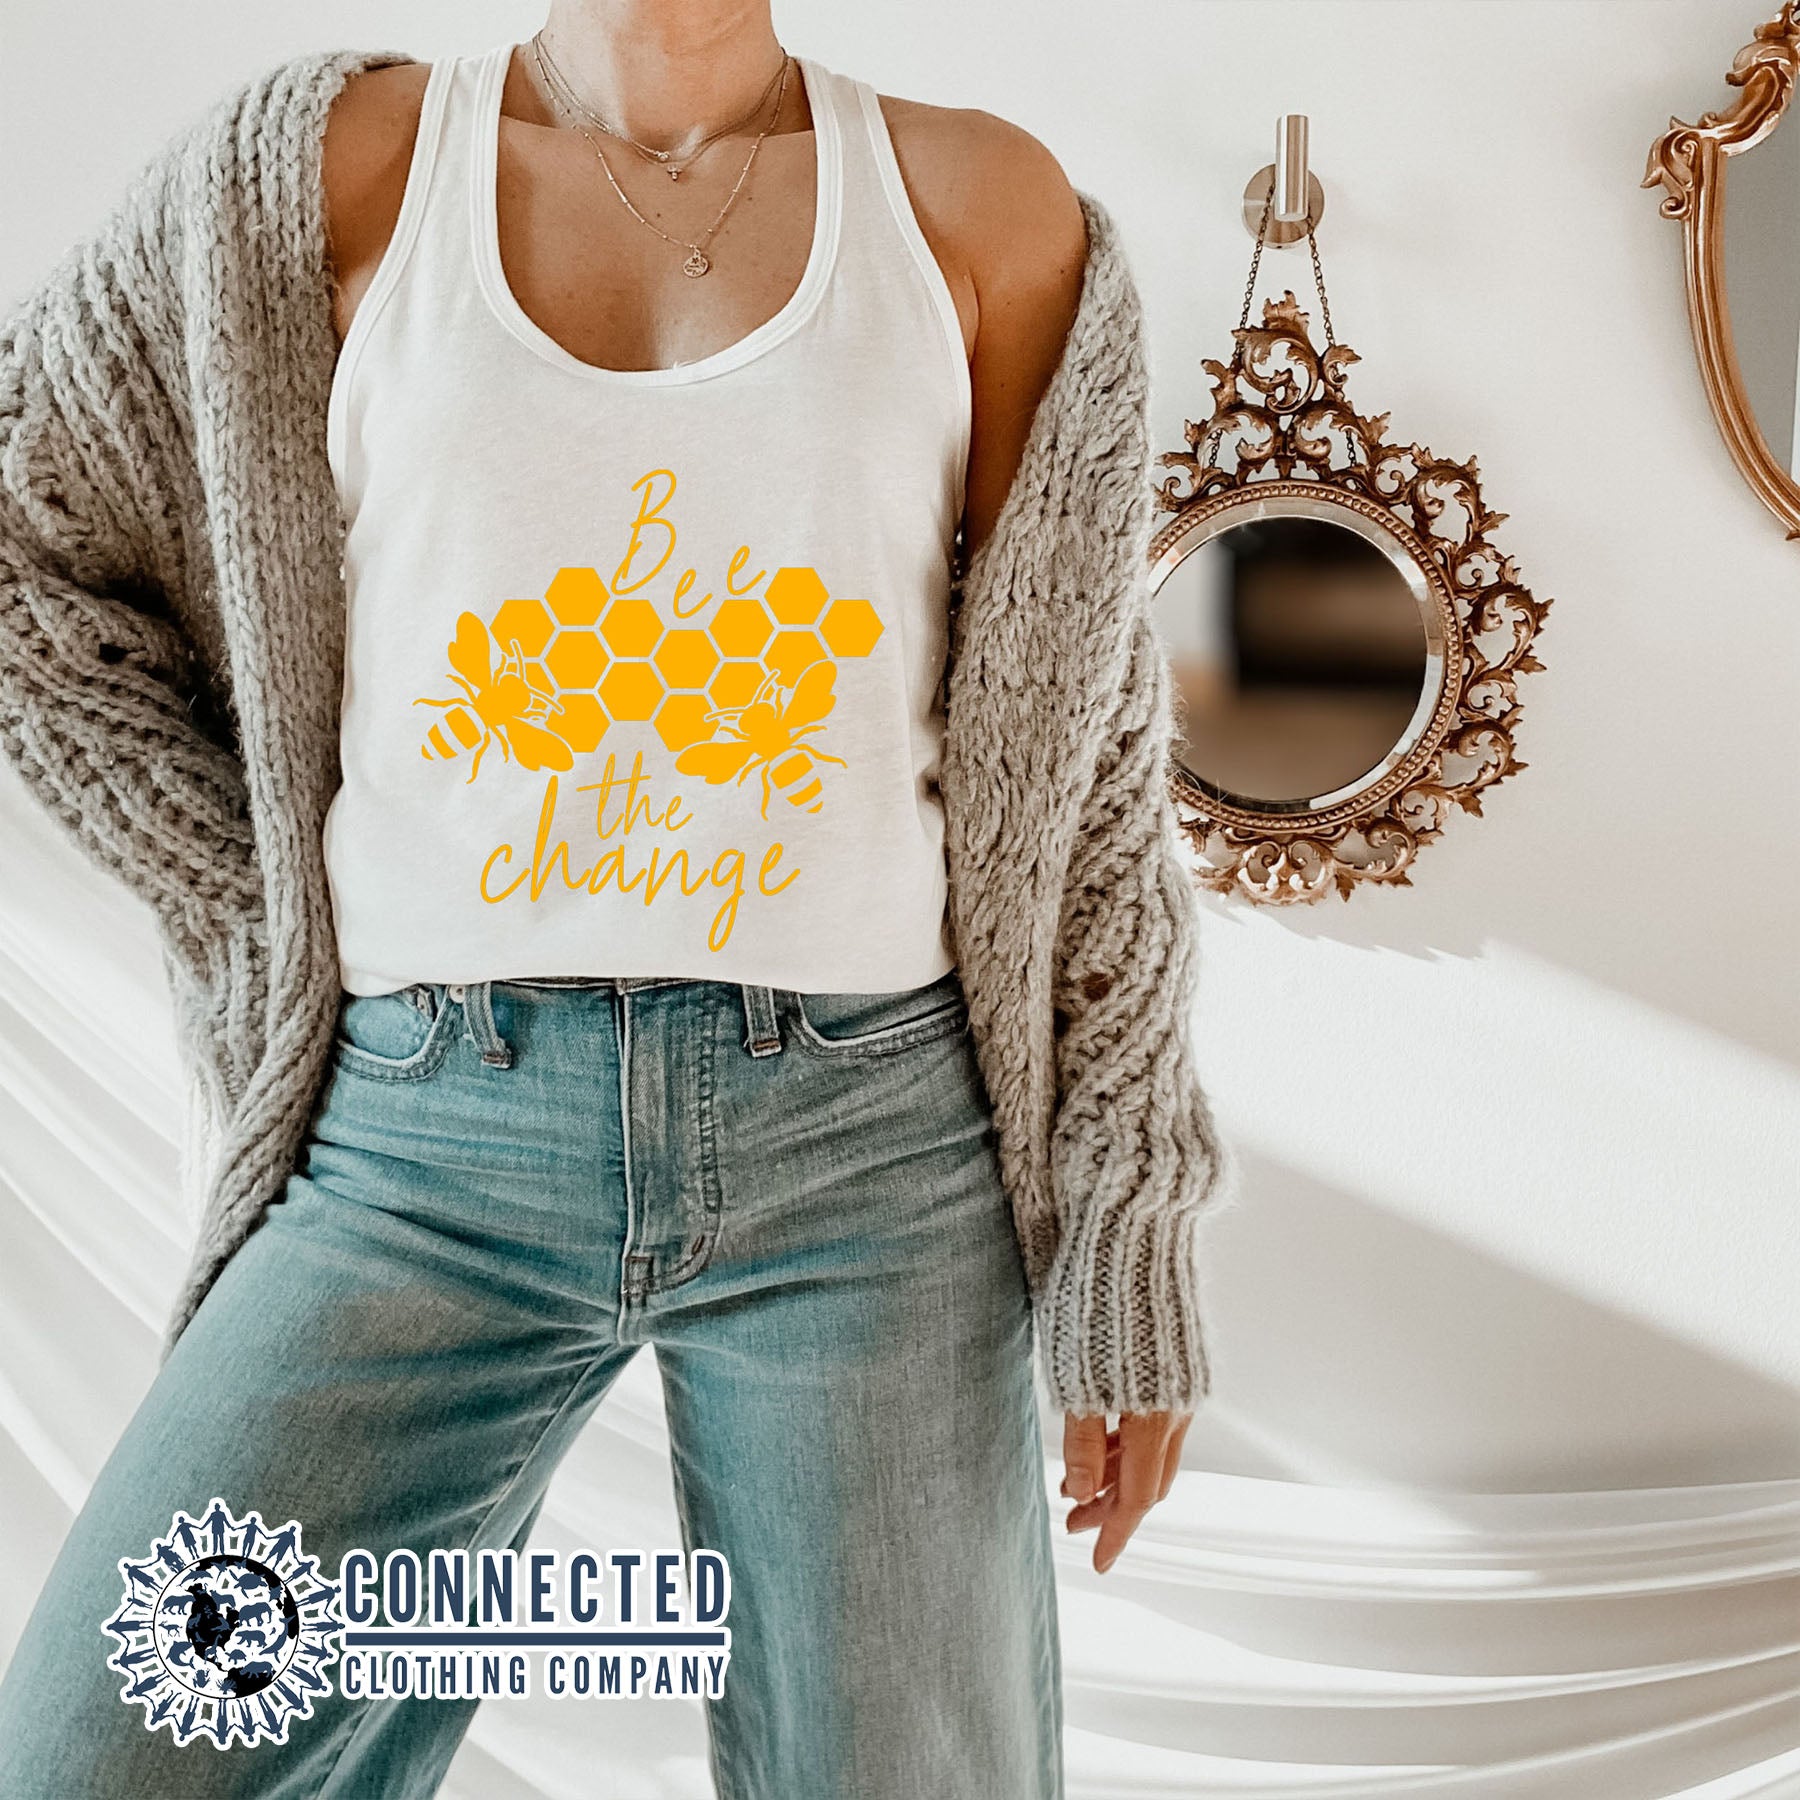 Model Wearing White Bee The Change Women's Tank - Connected Clothing Company - 10% of profits donated to the Honeybee Conservancy